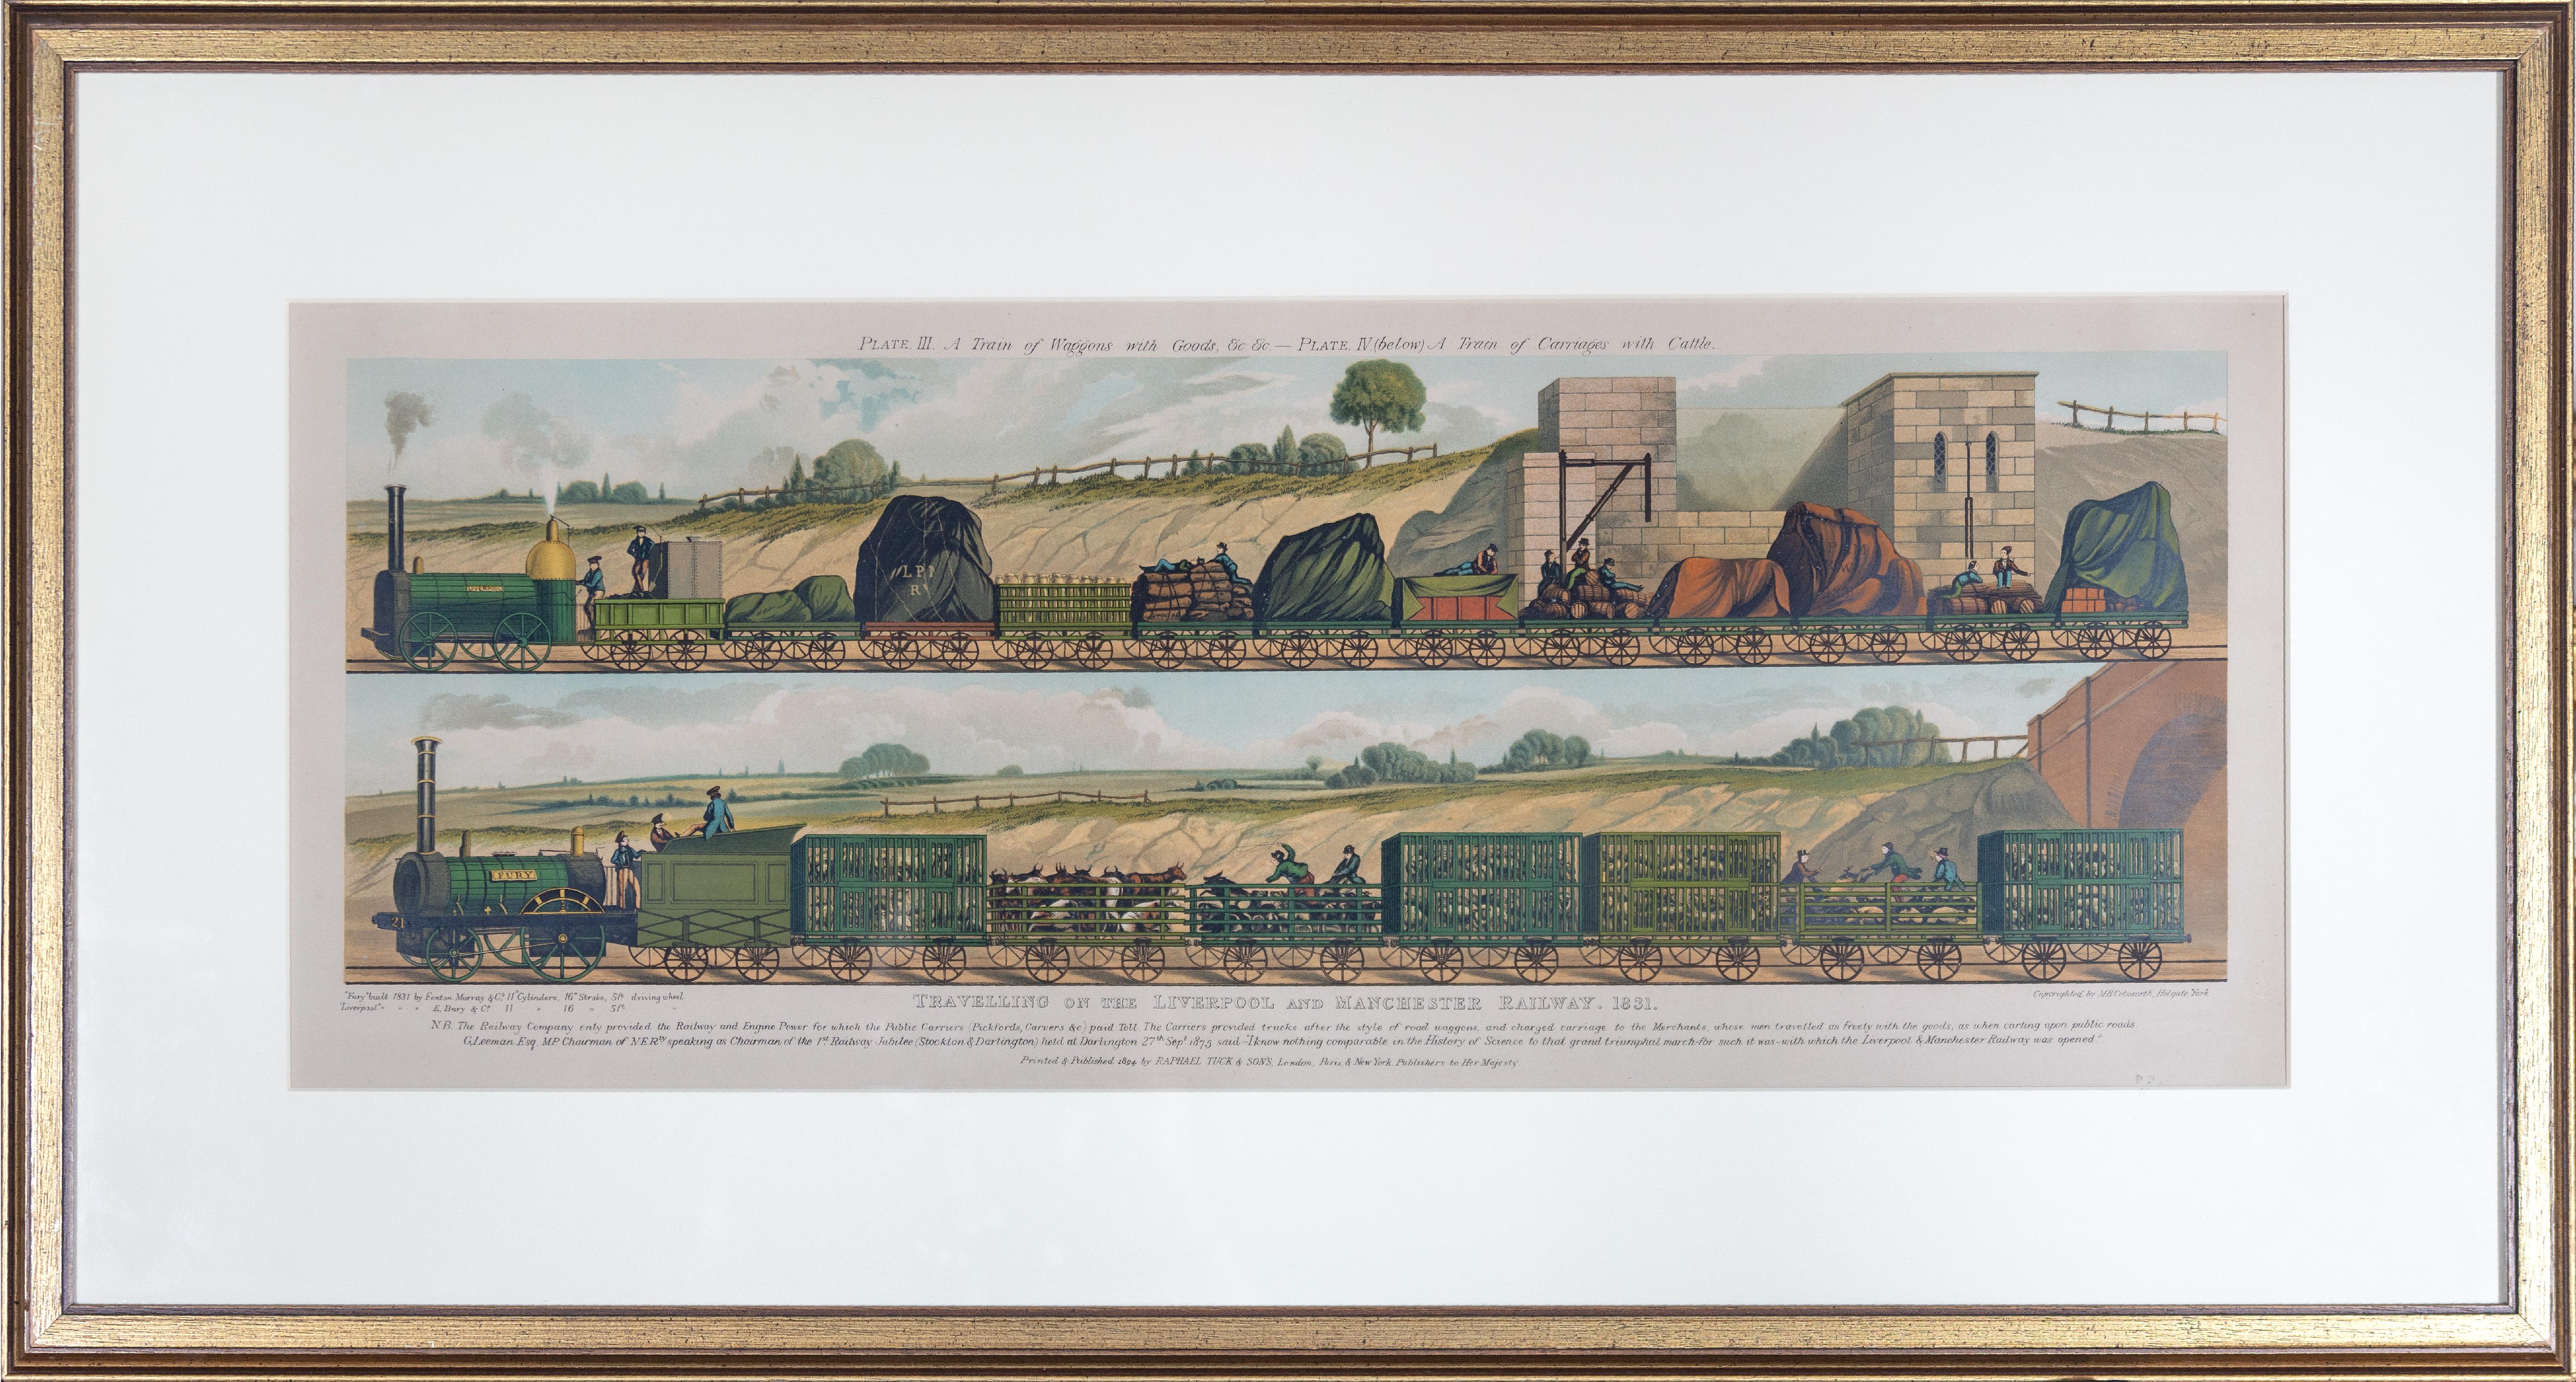 Raphael Tuck & Sons Landscape Print - "Traveling on the Liverpool & Manchester Railroad, 1831, " Raphael Tuck & Son